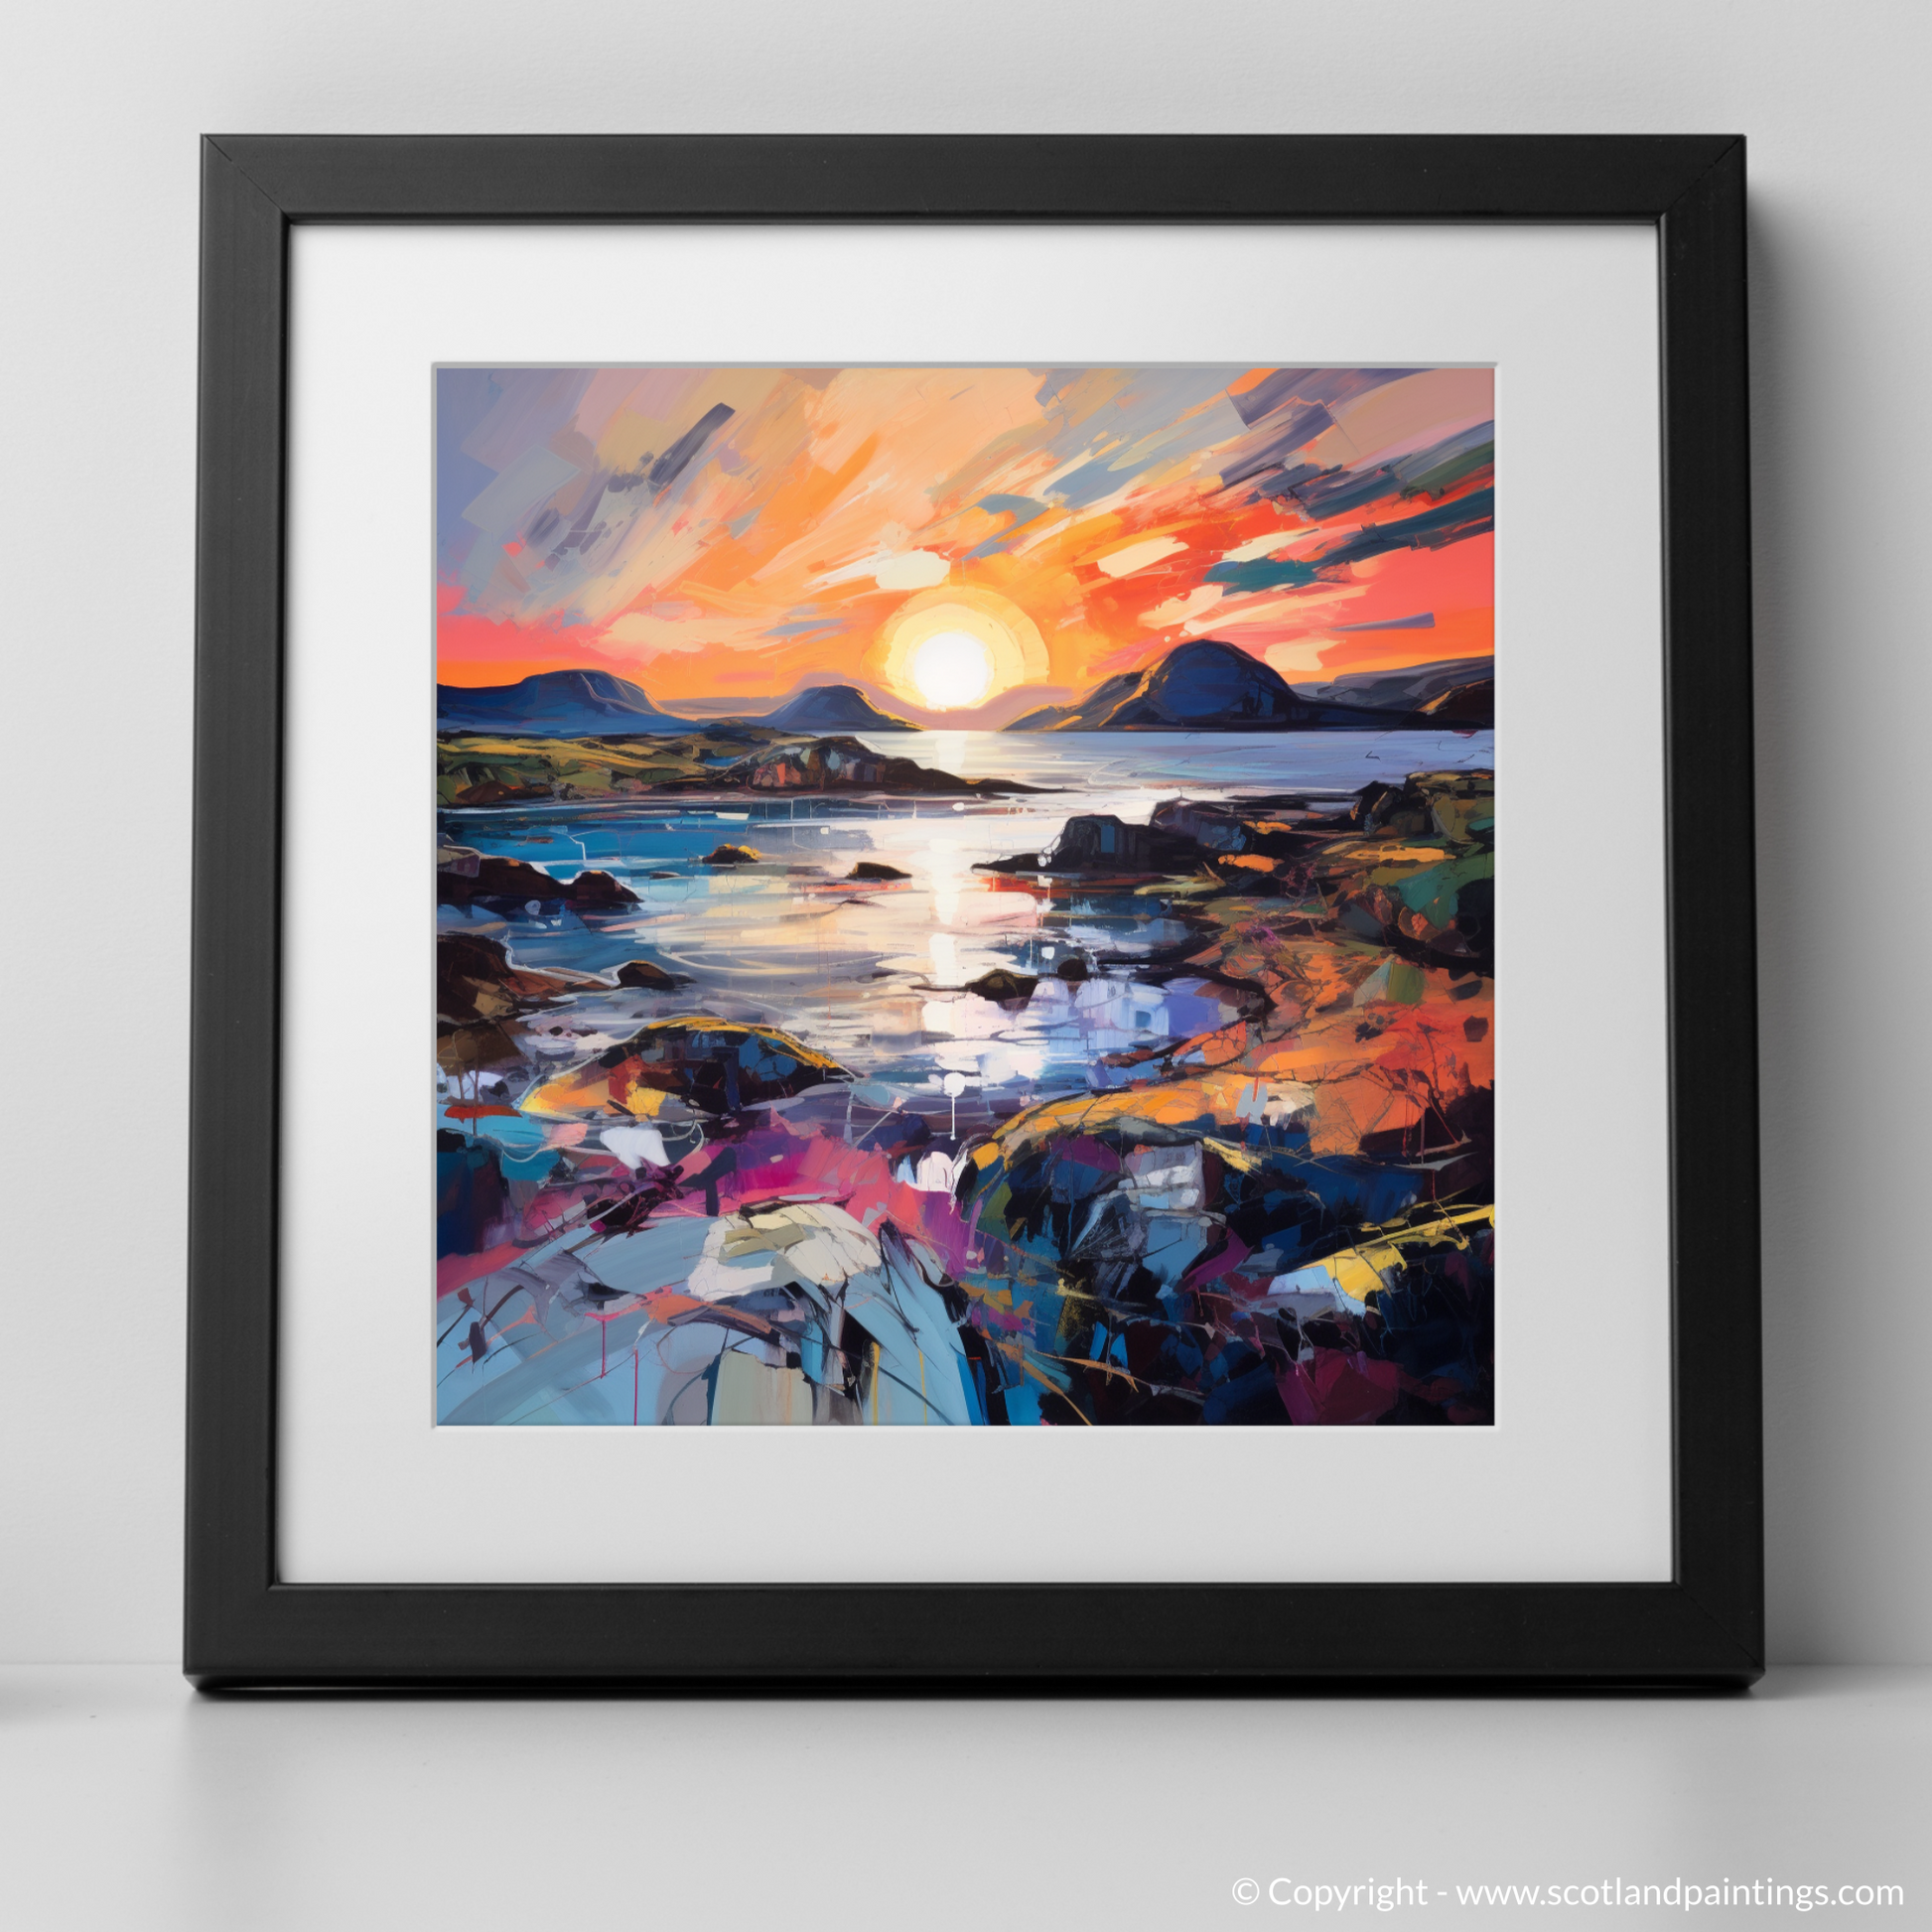 Art Print of Ardtun Bay at sunset with a black frame